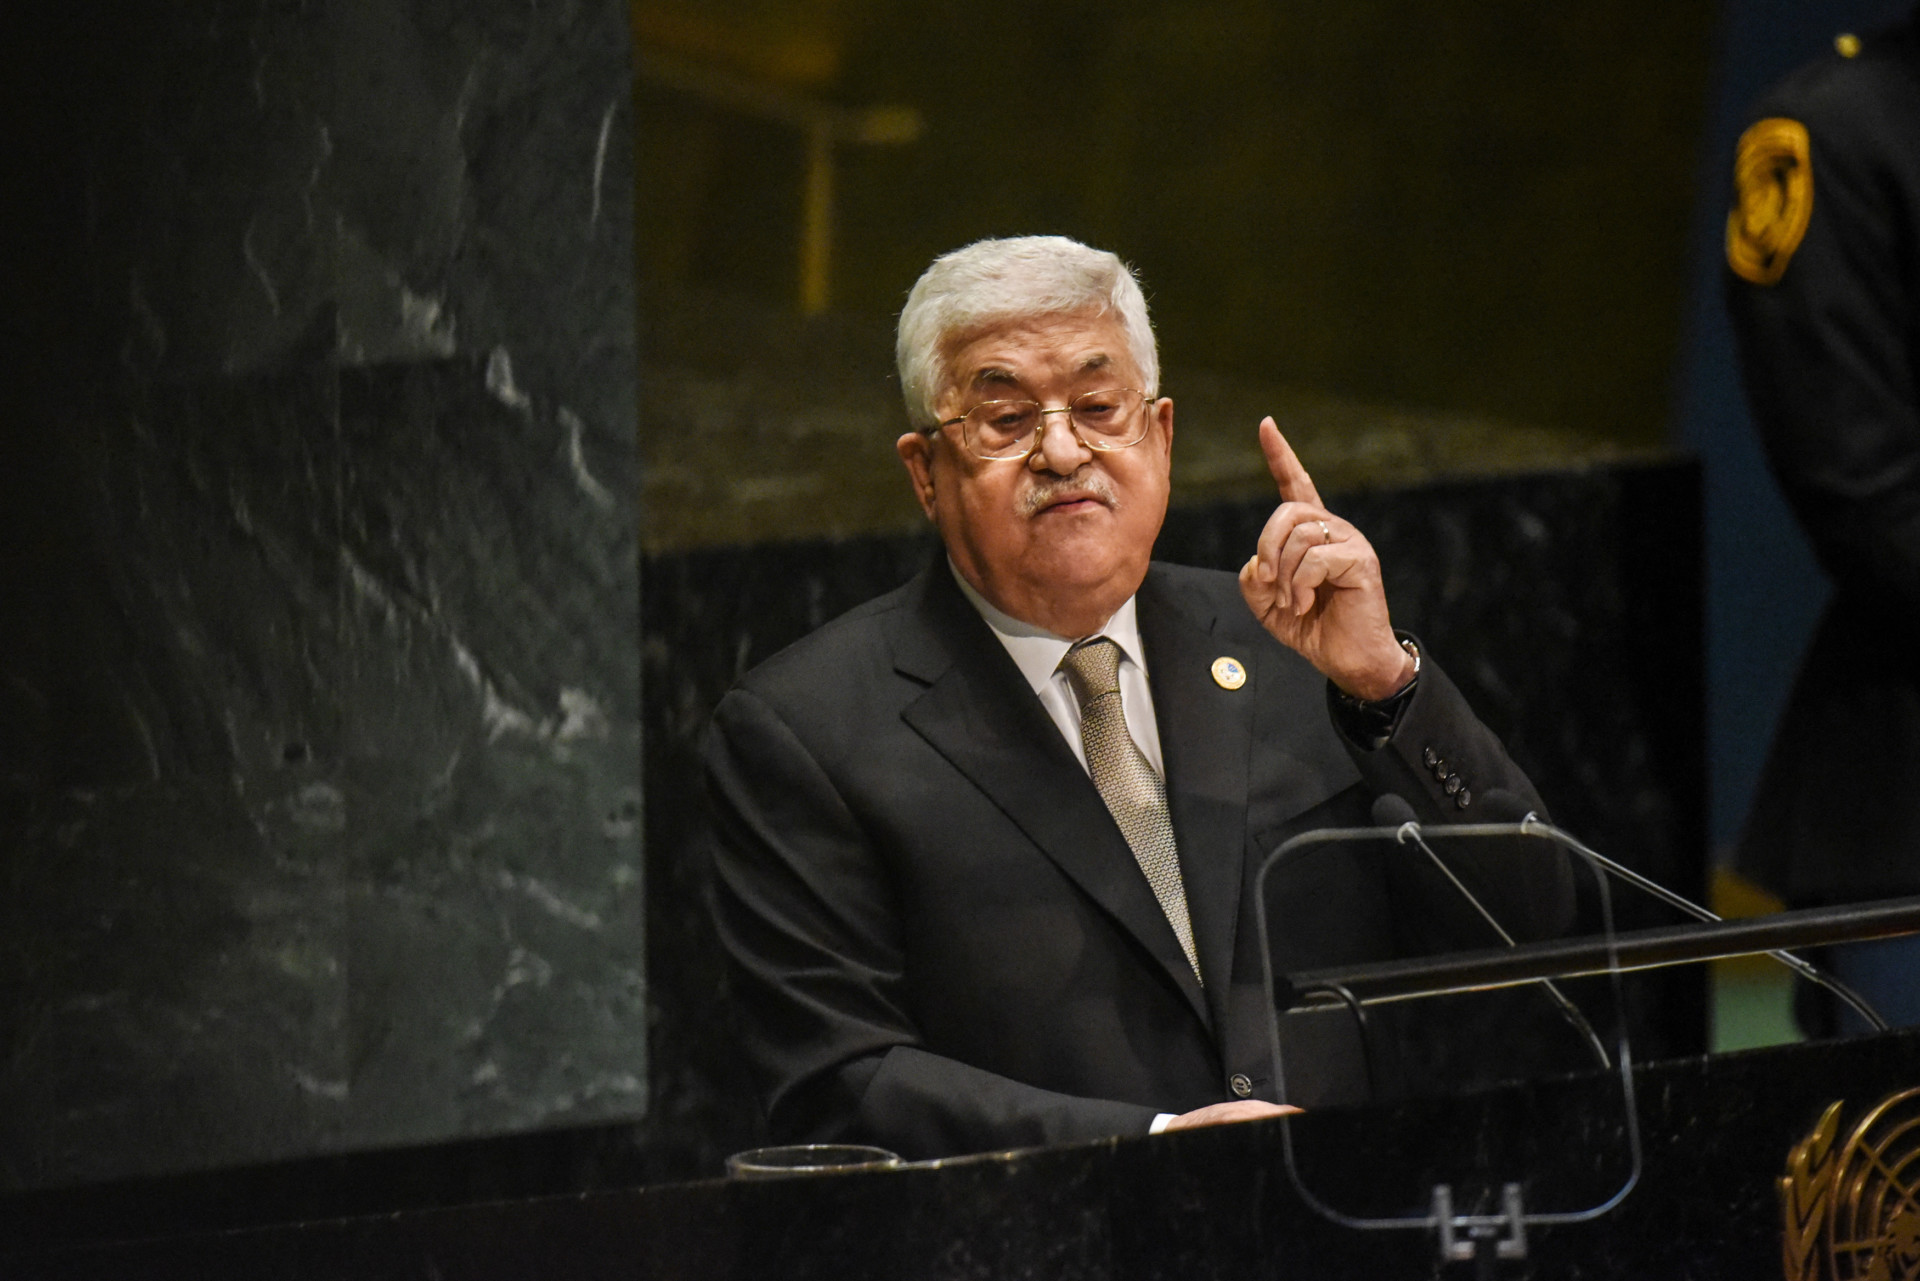 World Leaders Address United Nations General Assembly|20210527-palestinian-authority_LegChart|20210527-palestinian-authority-MAP|20210527-palestinian-authority_PresChart|20210527-palestinian-authority_SettlersChart